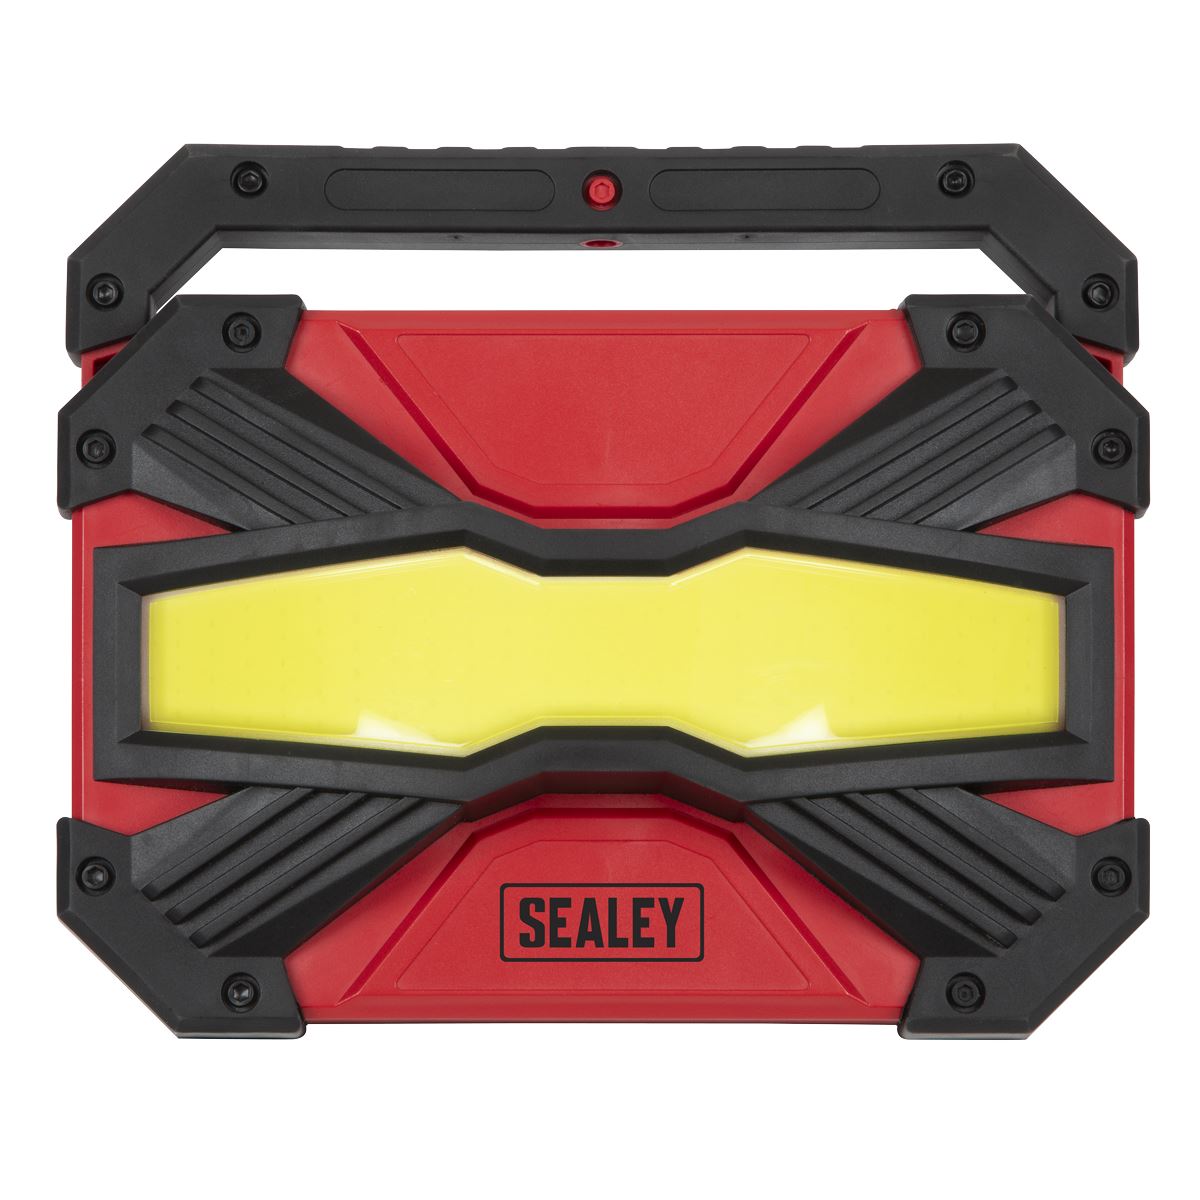 Sealey Rechargeable Portable Floodlight & Power Bank 30W COB LED